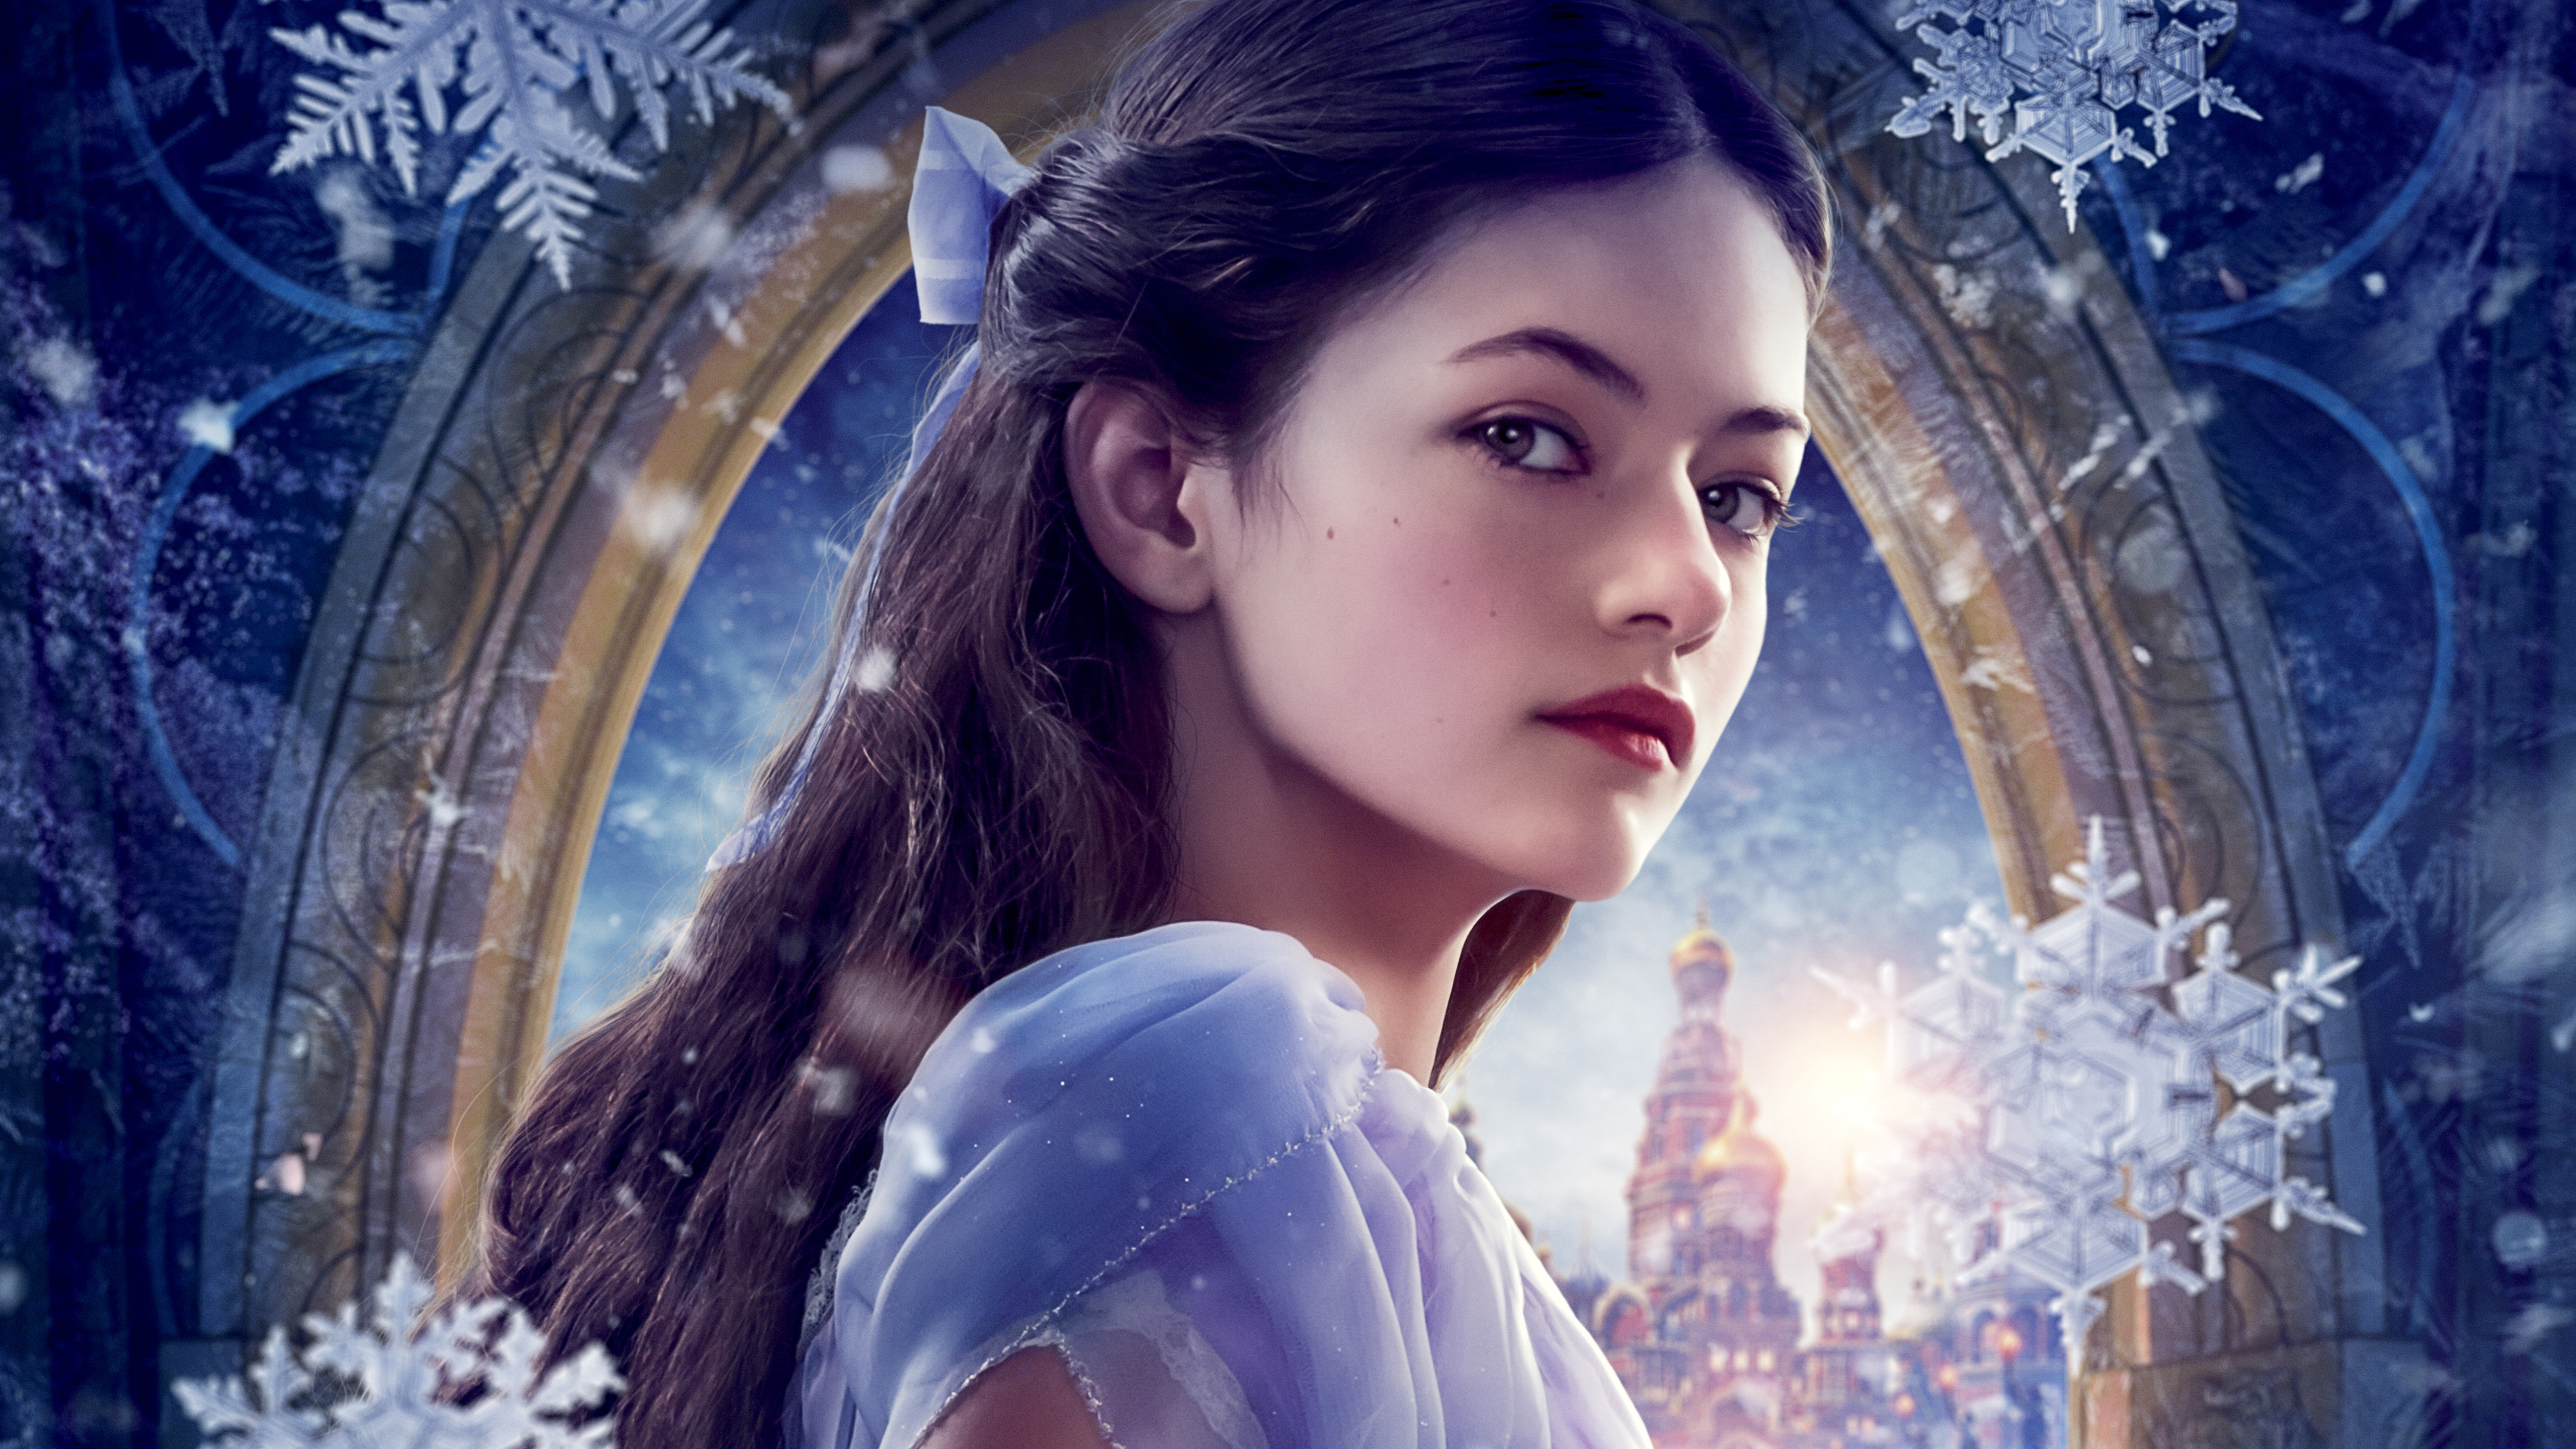 Mackenzie Foy as Clara in The Nutcracker and the Four Realms 5K Wallpapers